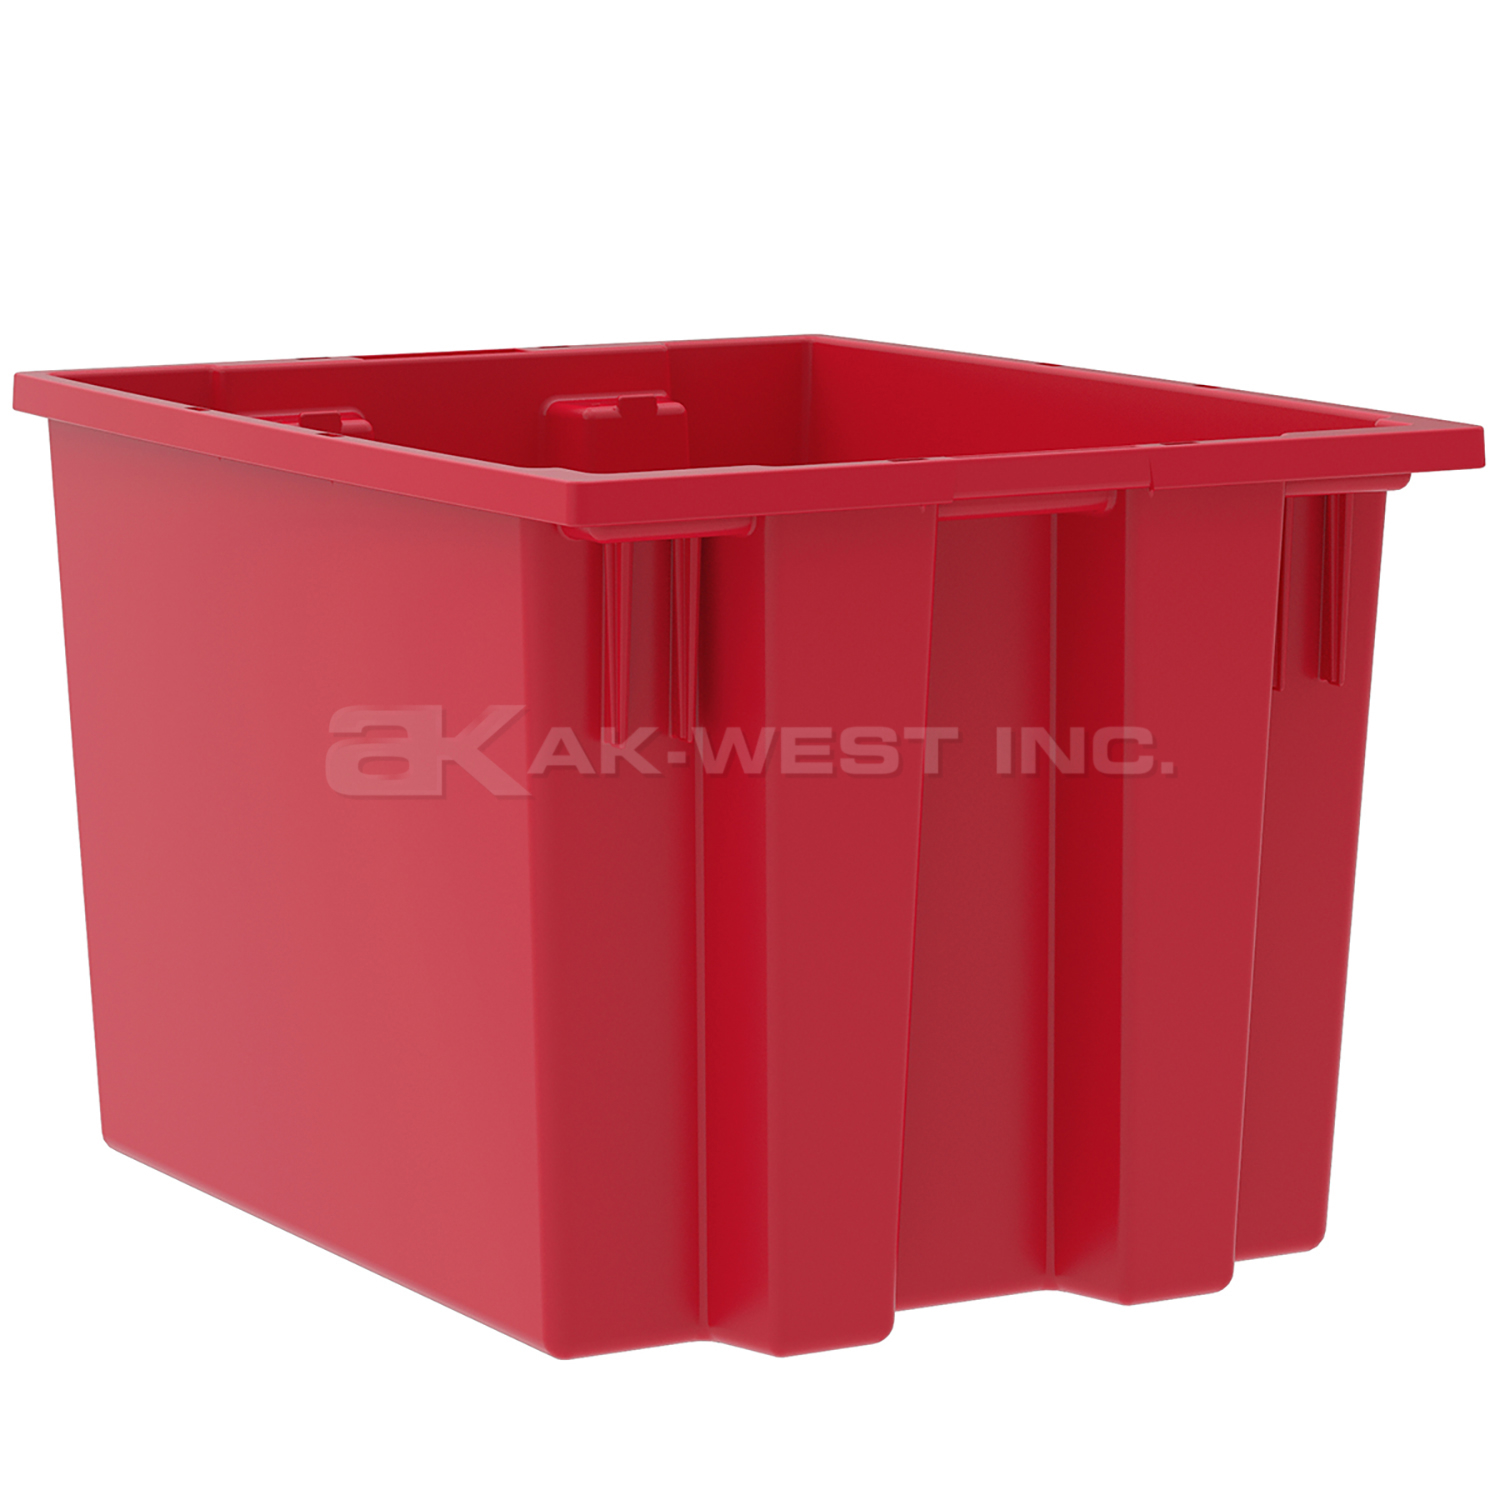 Red, 19-1/2" x 15-1/2" x 13" Nest and Stack Tote (6 Per Carton)